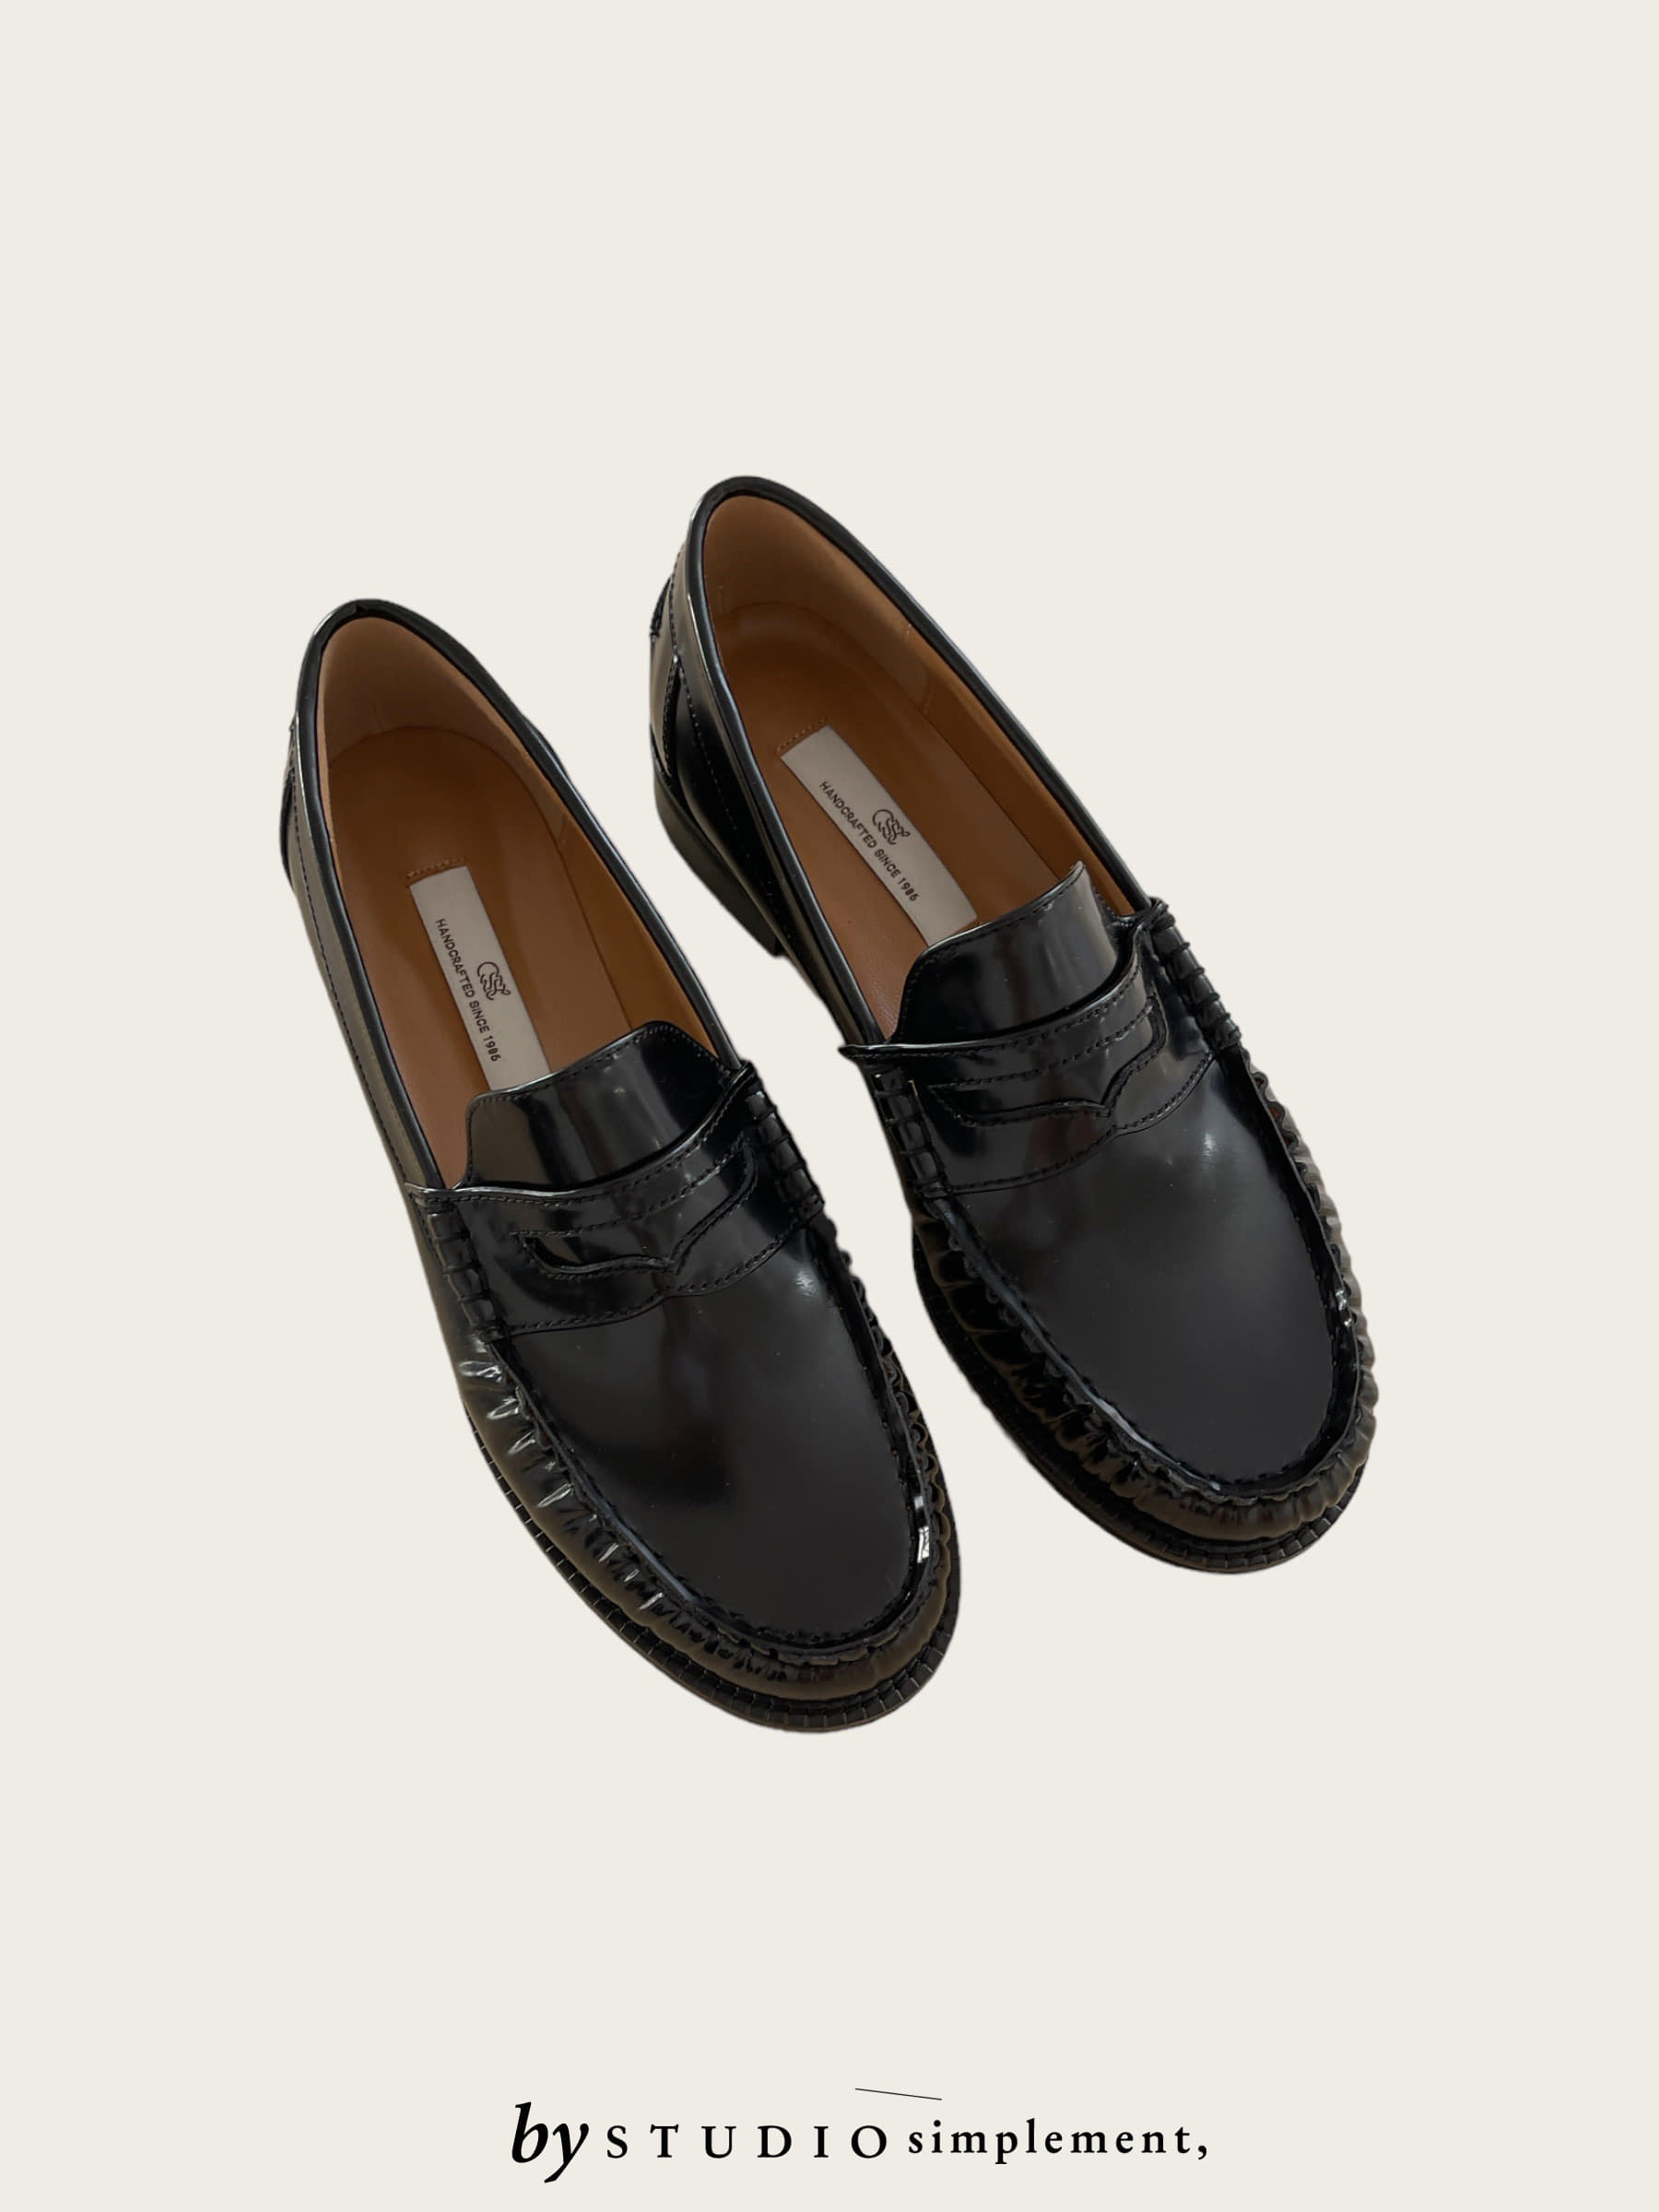 Penny Loafer by Ssimplement,